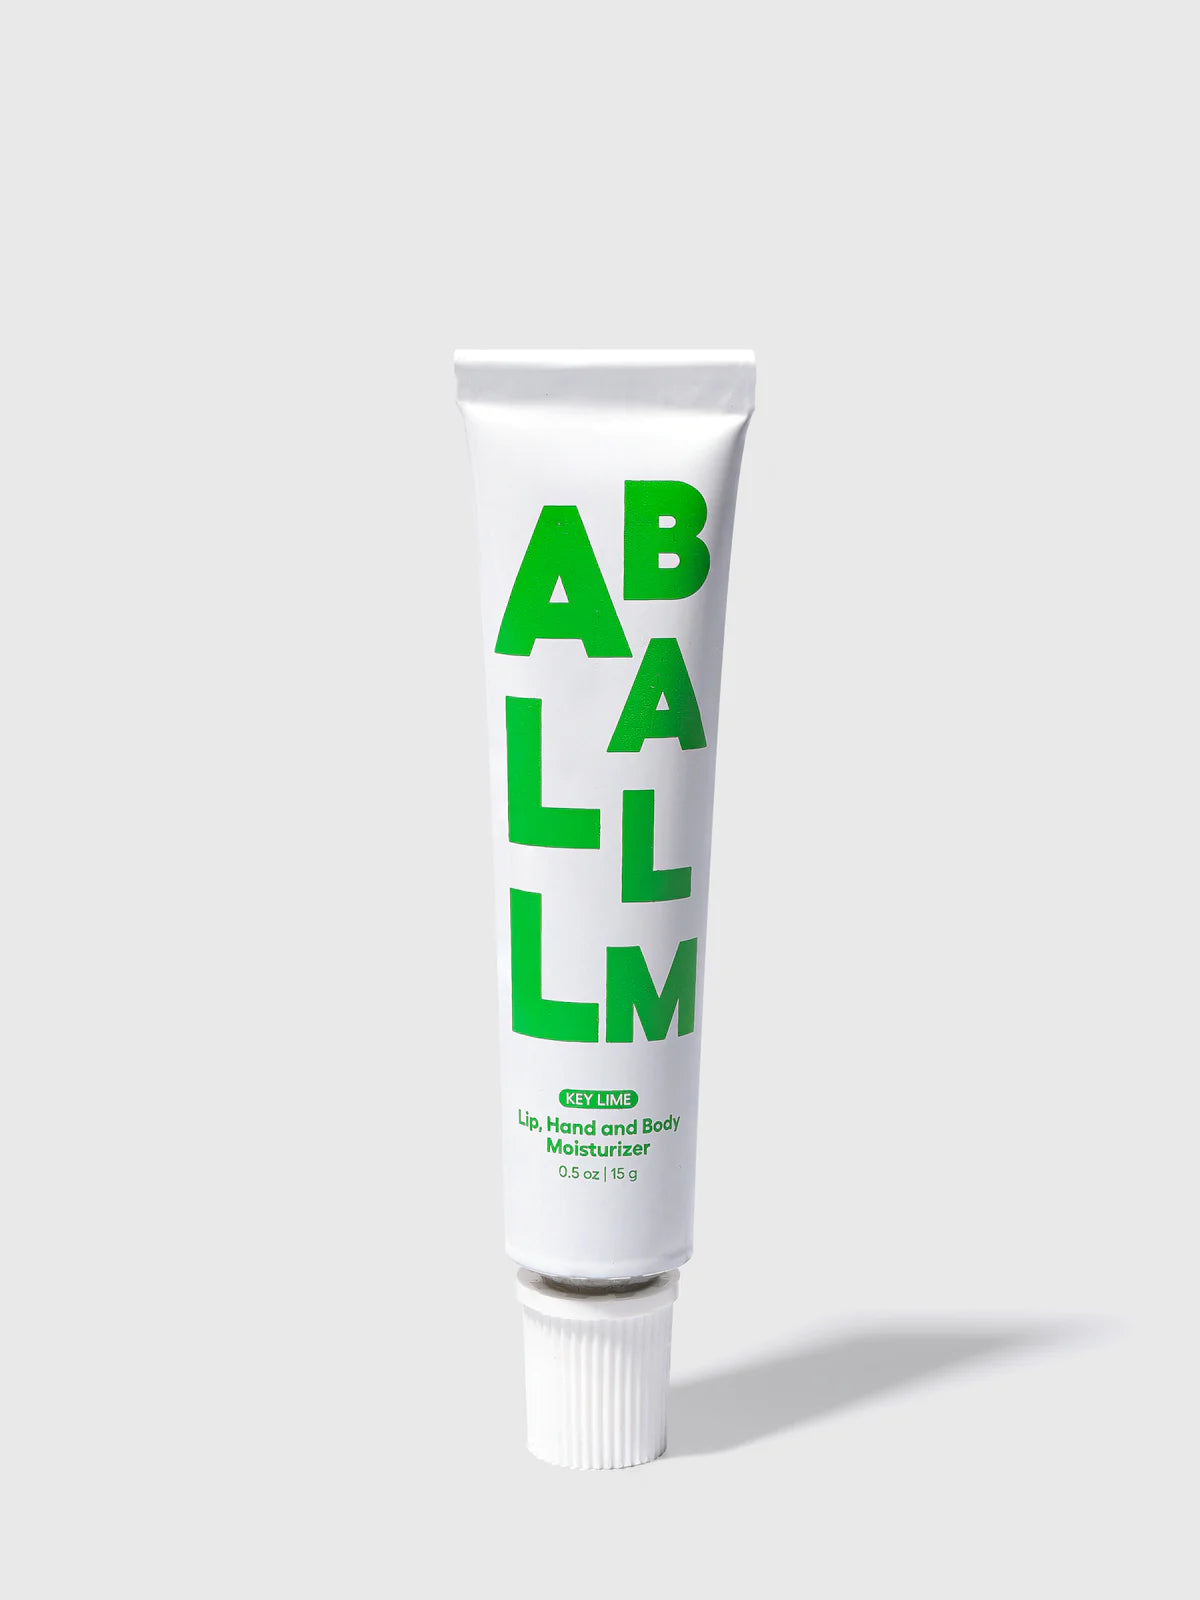 All Balm for Dry Skin - Key Lime